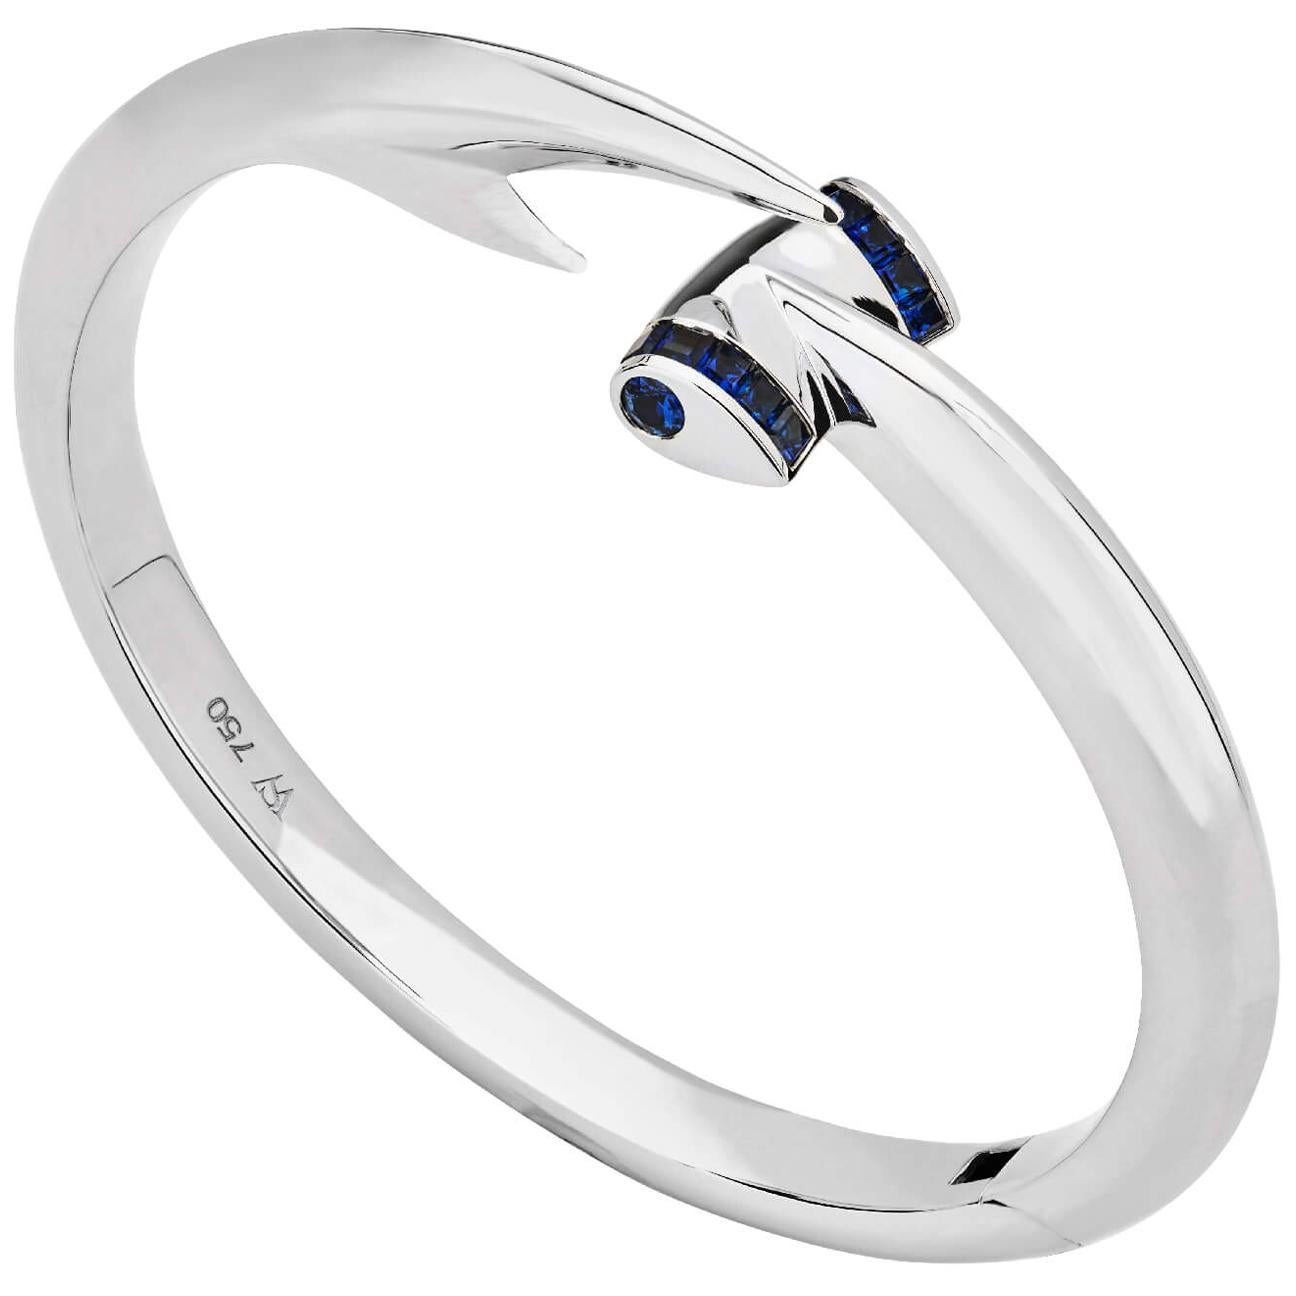 Stephen Webster Blue Sapphire and 18 Carat White Gold Hammerhead Bangle